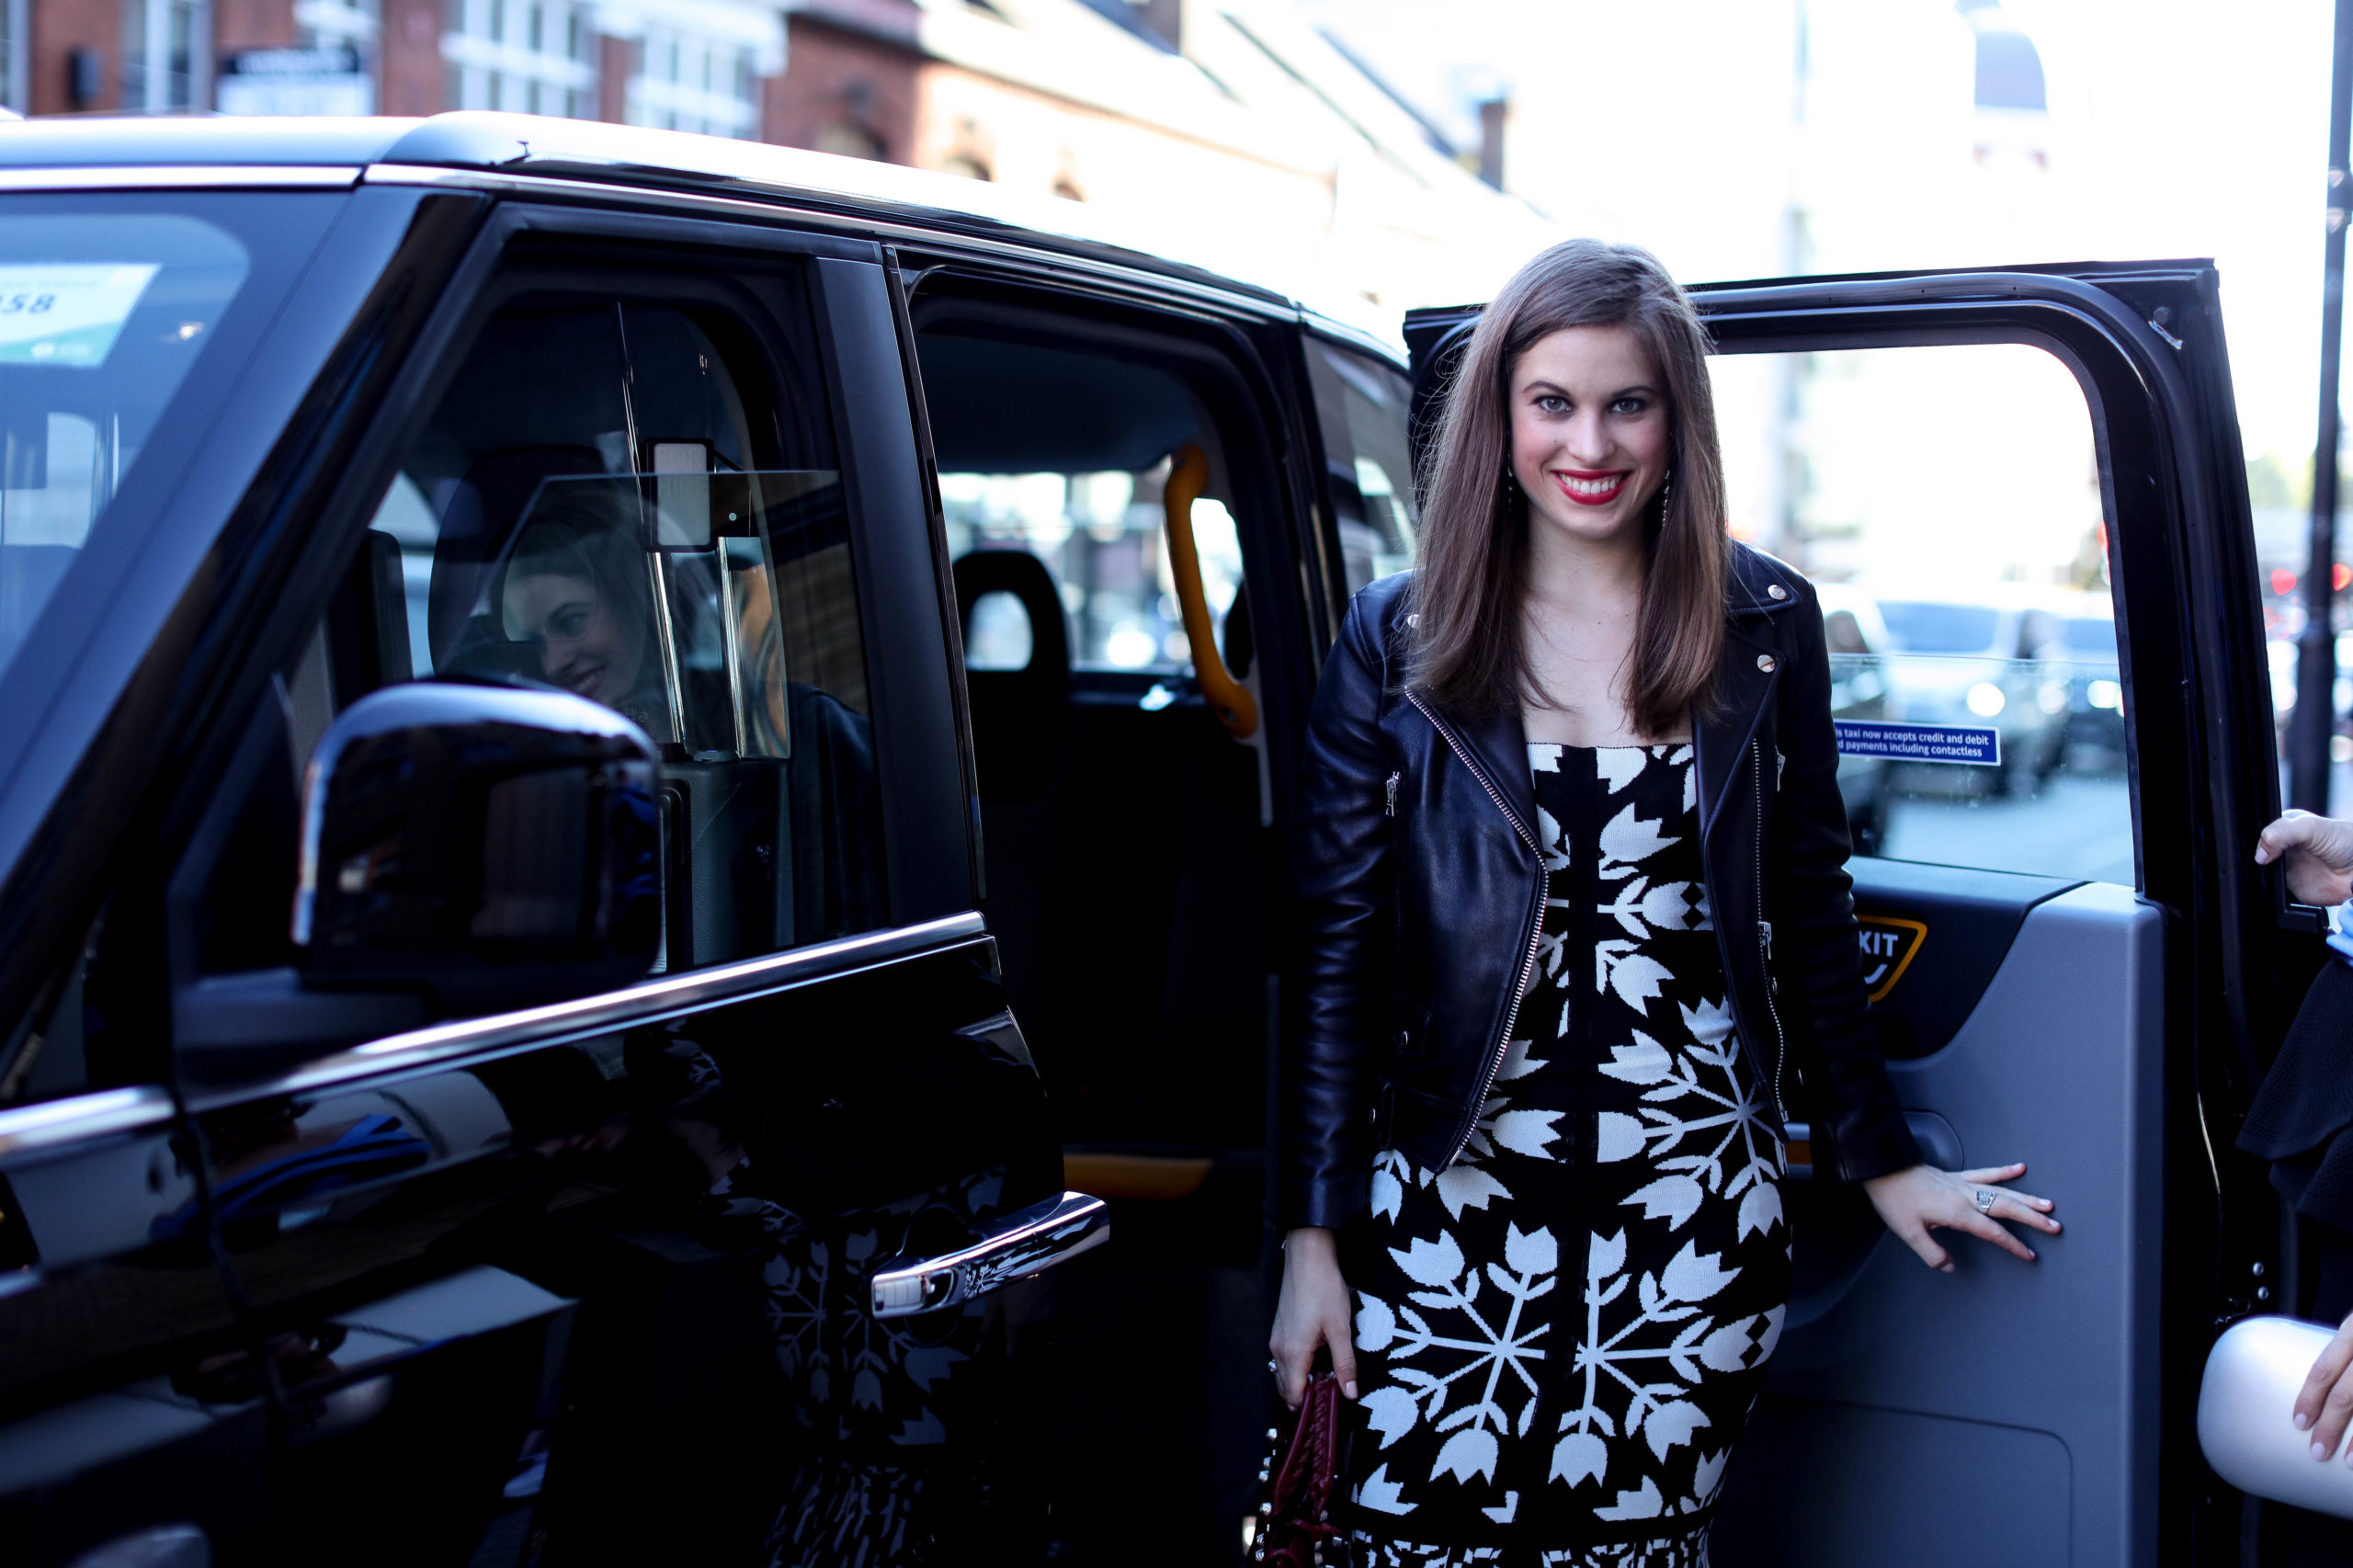 Woman with brown hair getting out of a taxi cab in London wearing a black leather jacket and a black & white printed dress